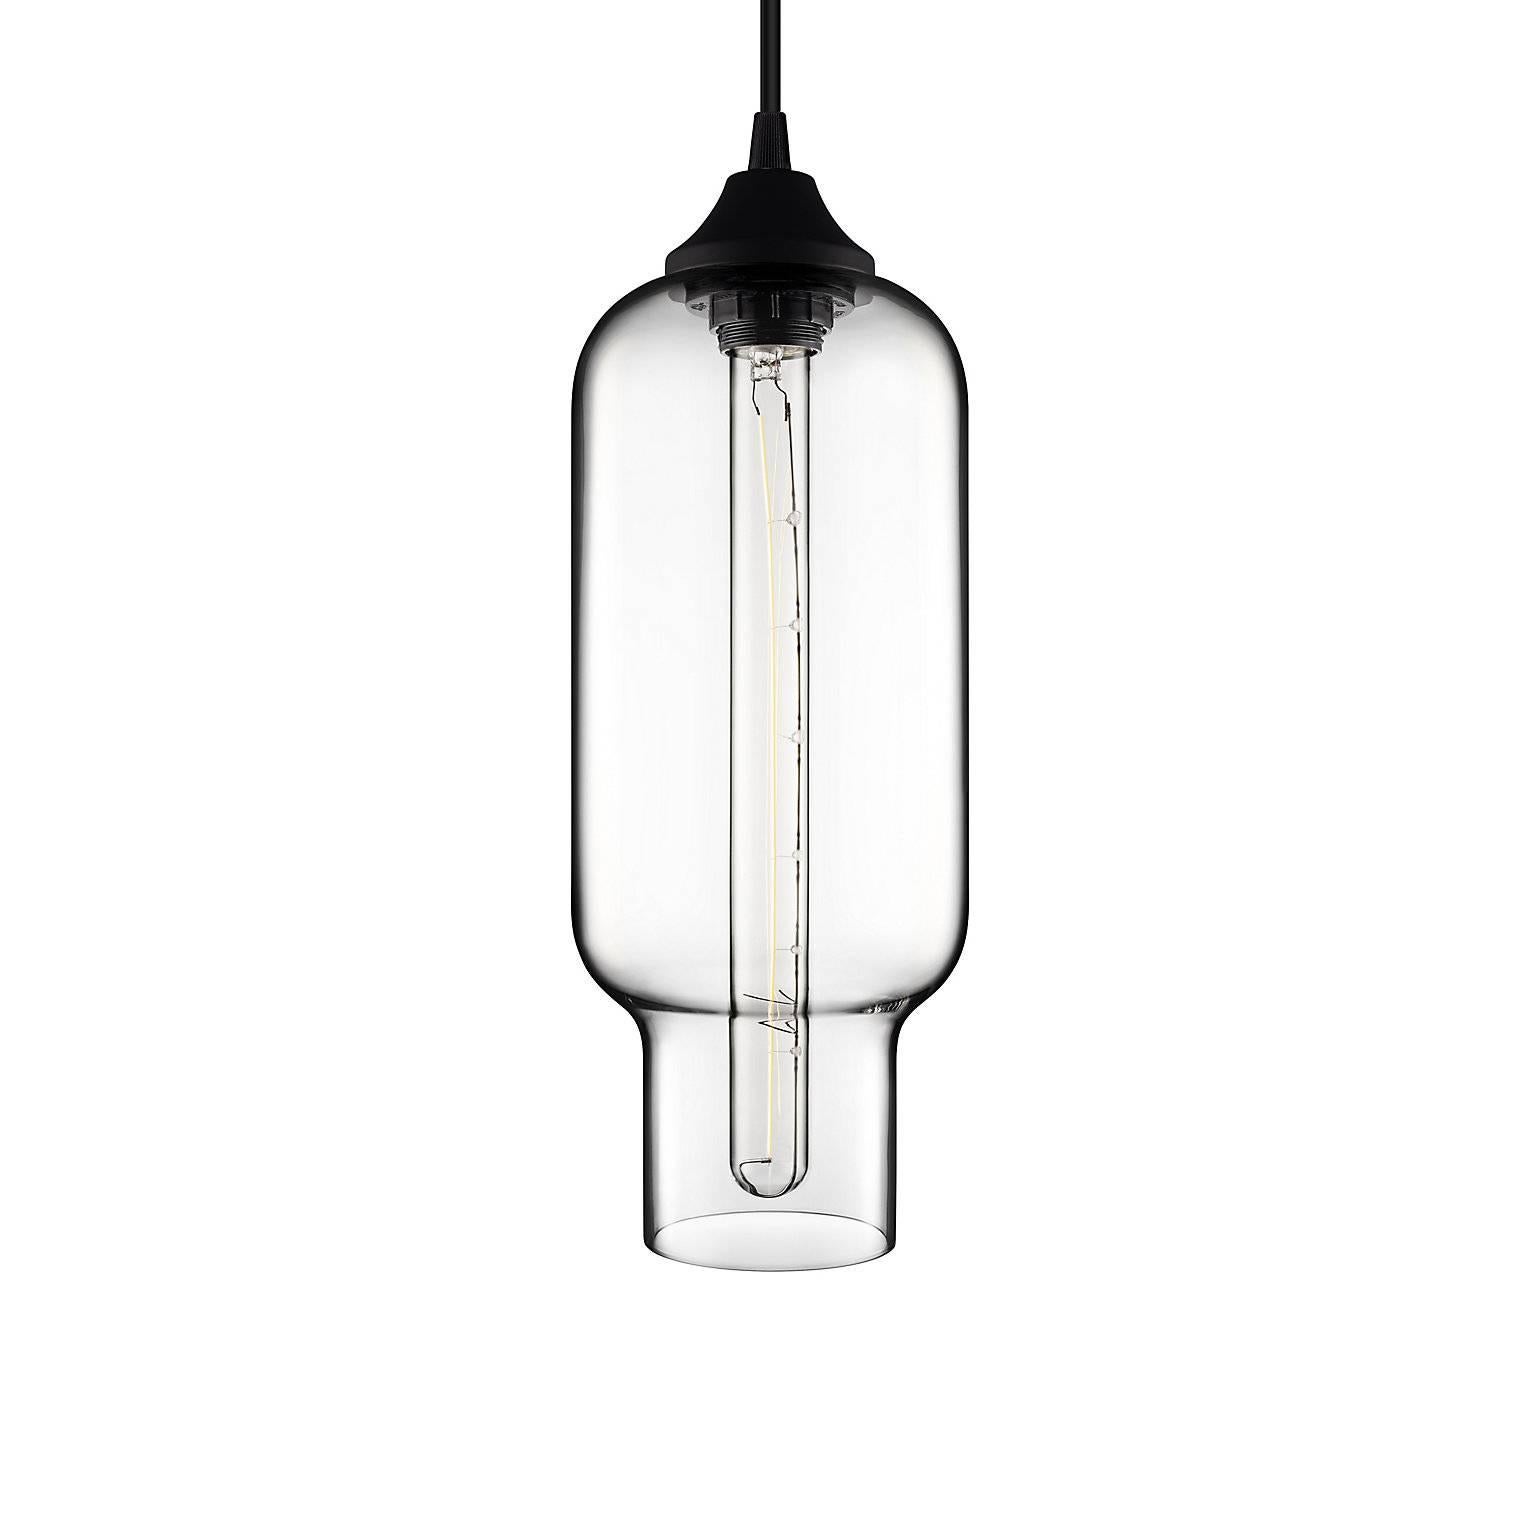 Pharos Gray Handblown Modern Glass Pendant Light, Made in the USA In New Condition For Sale In Beacon, NY